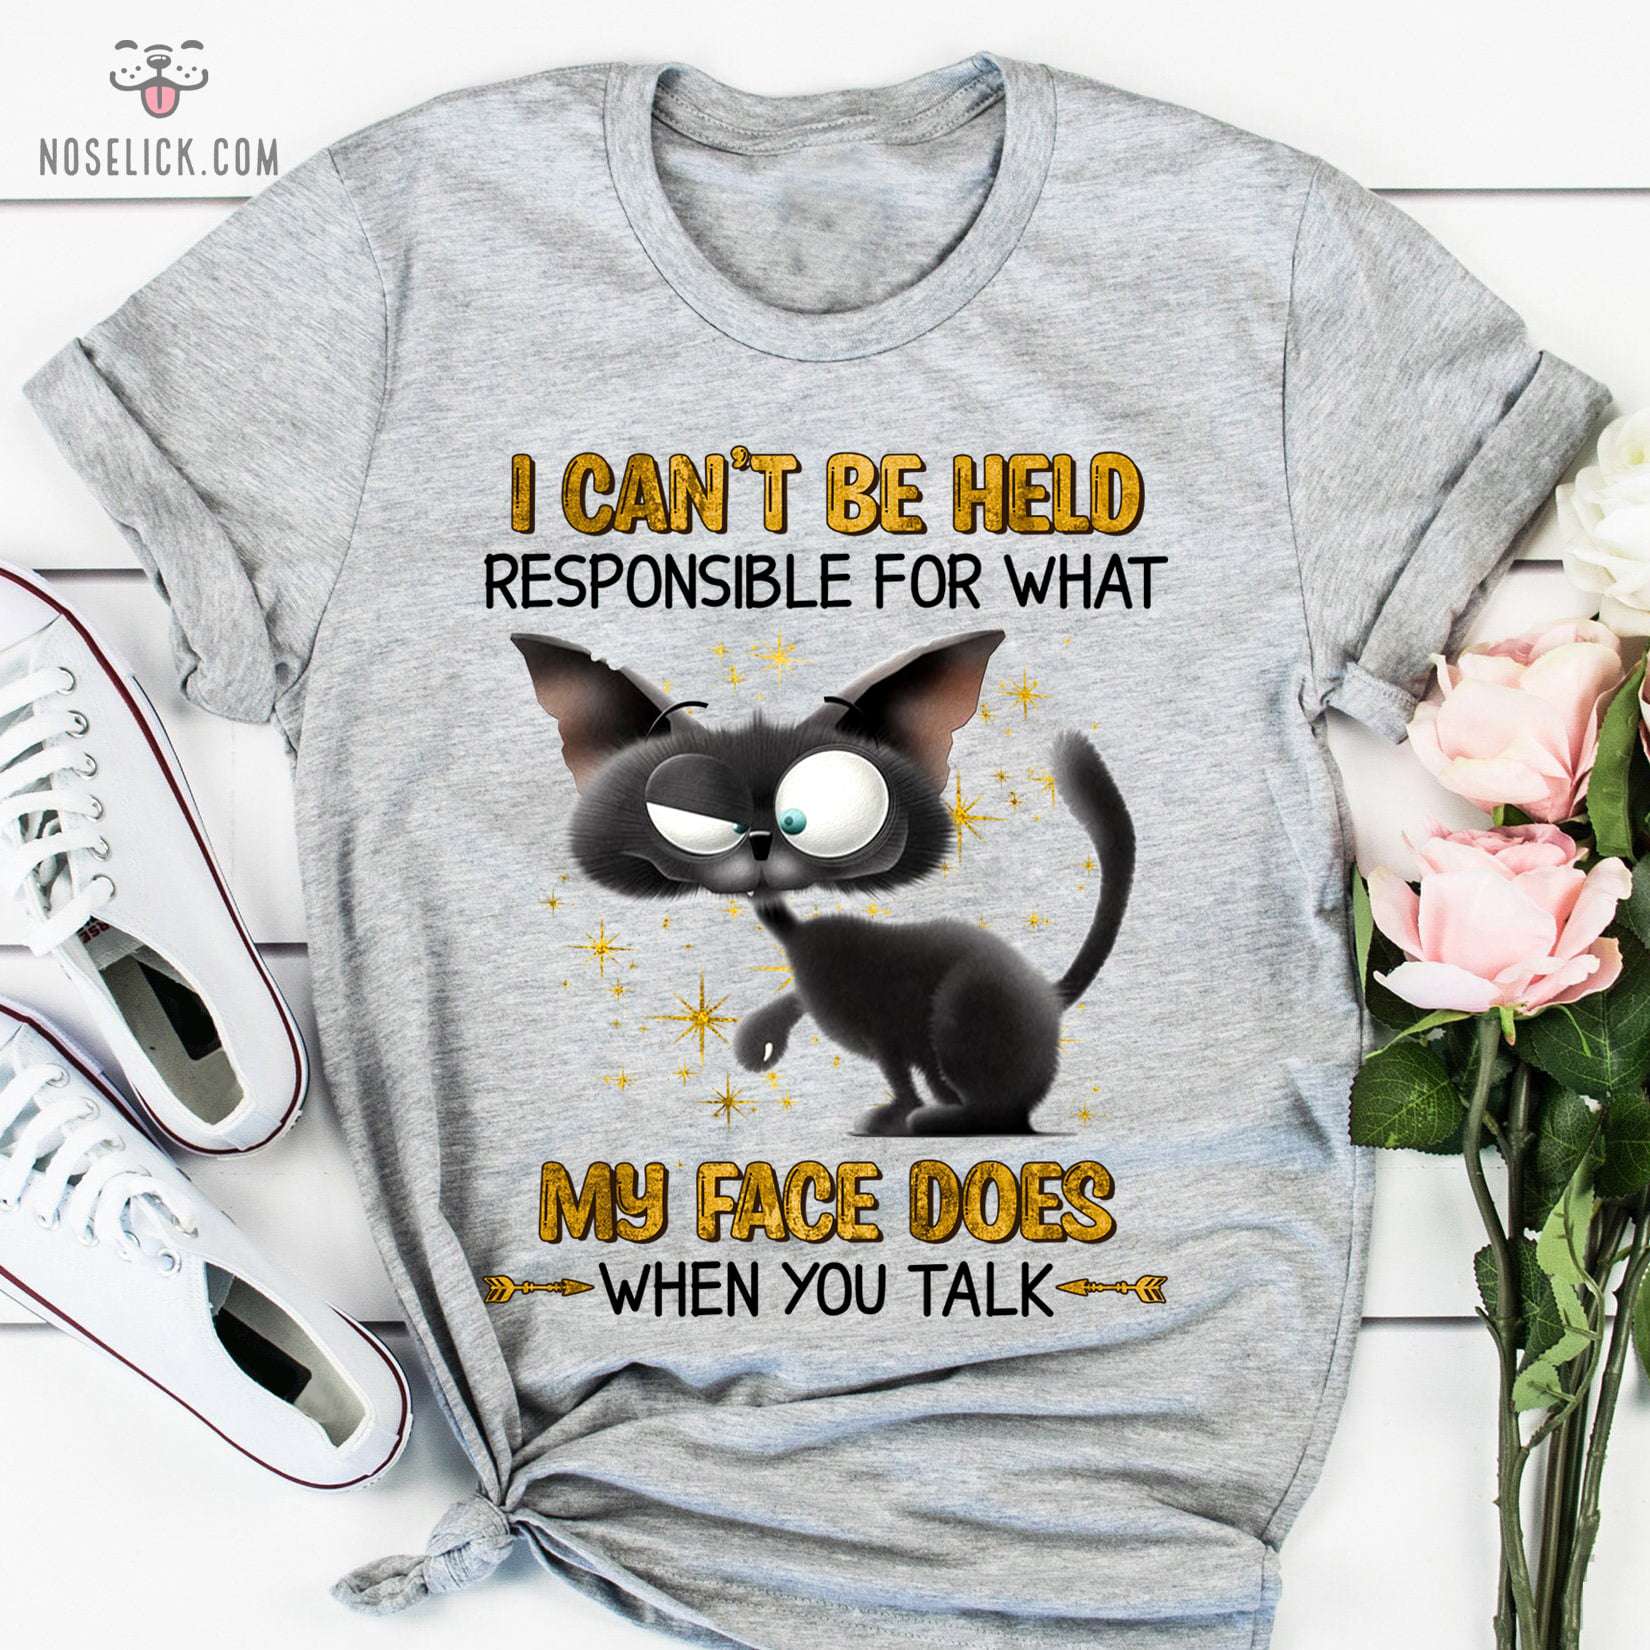 Funny Black Cat - I can't be held responsible for what my face does when you talk